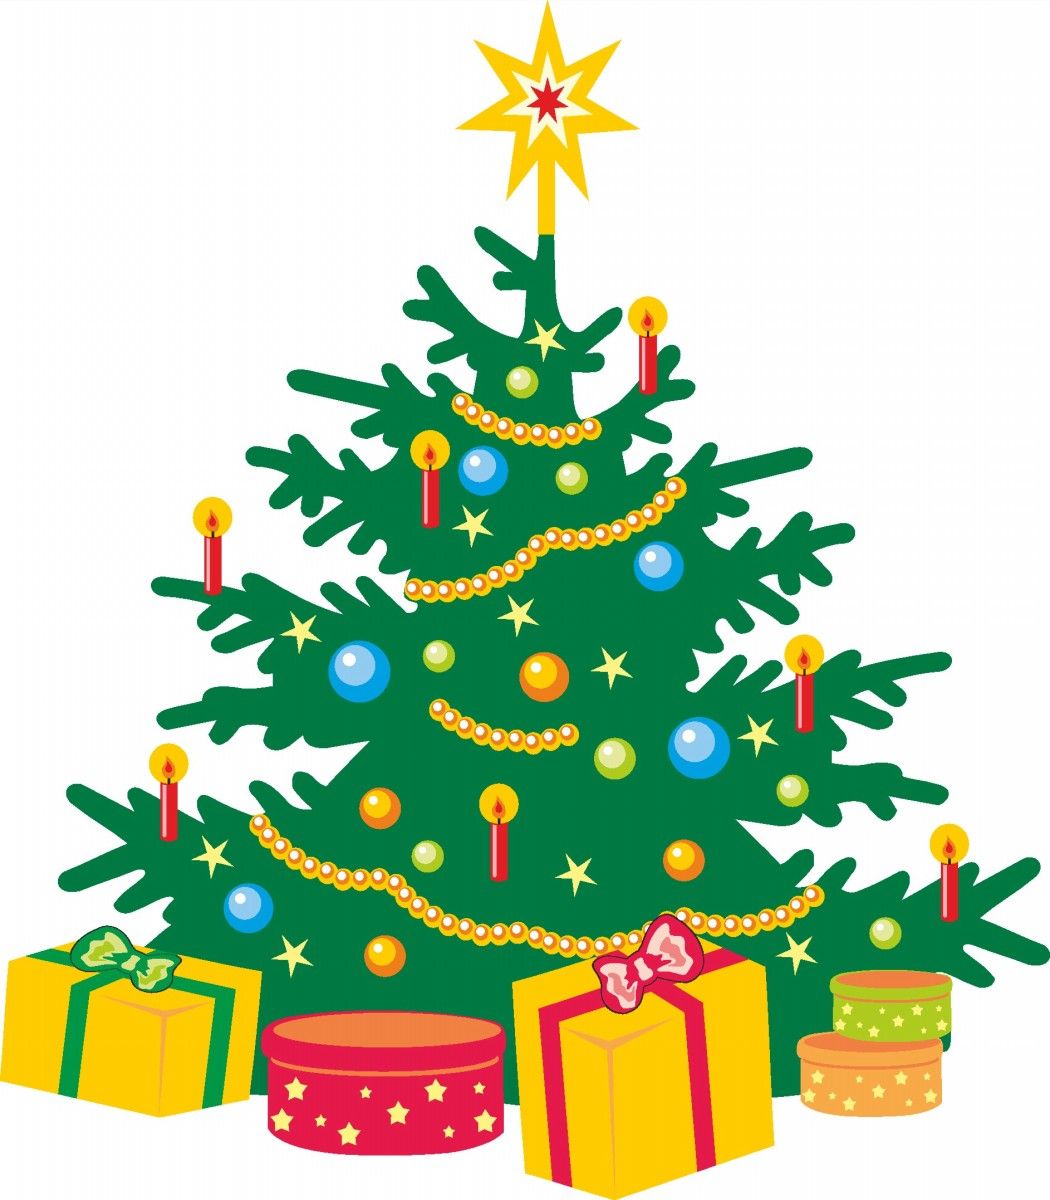 Free Picture Of Cartoon Christmas Trees, Download Free Clip Art, Free Clip Art on Clipart Library